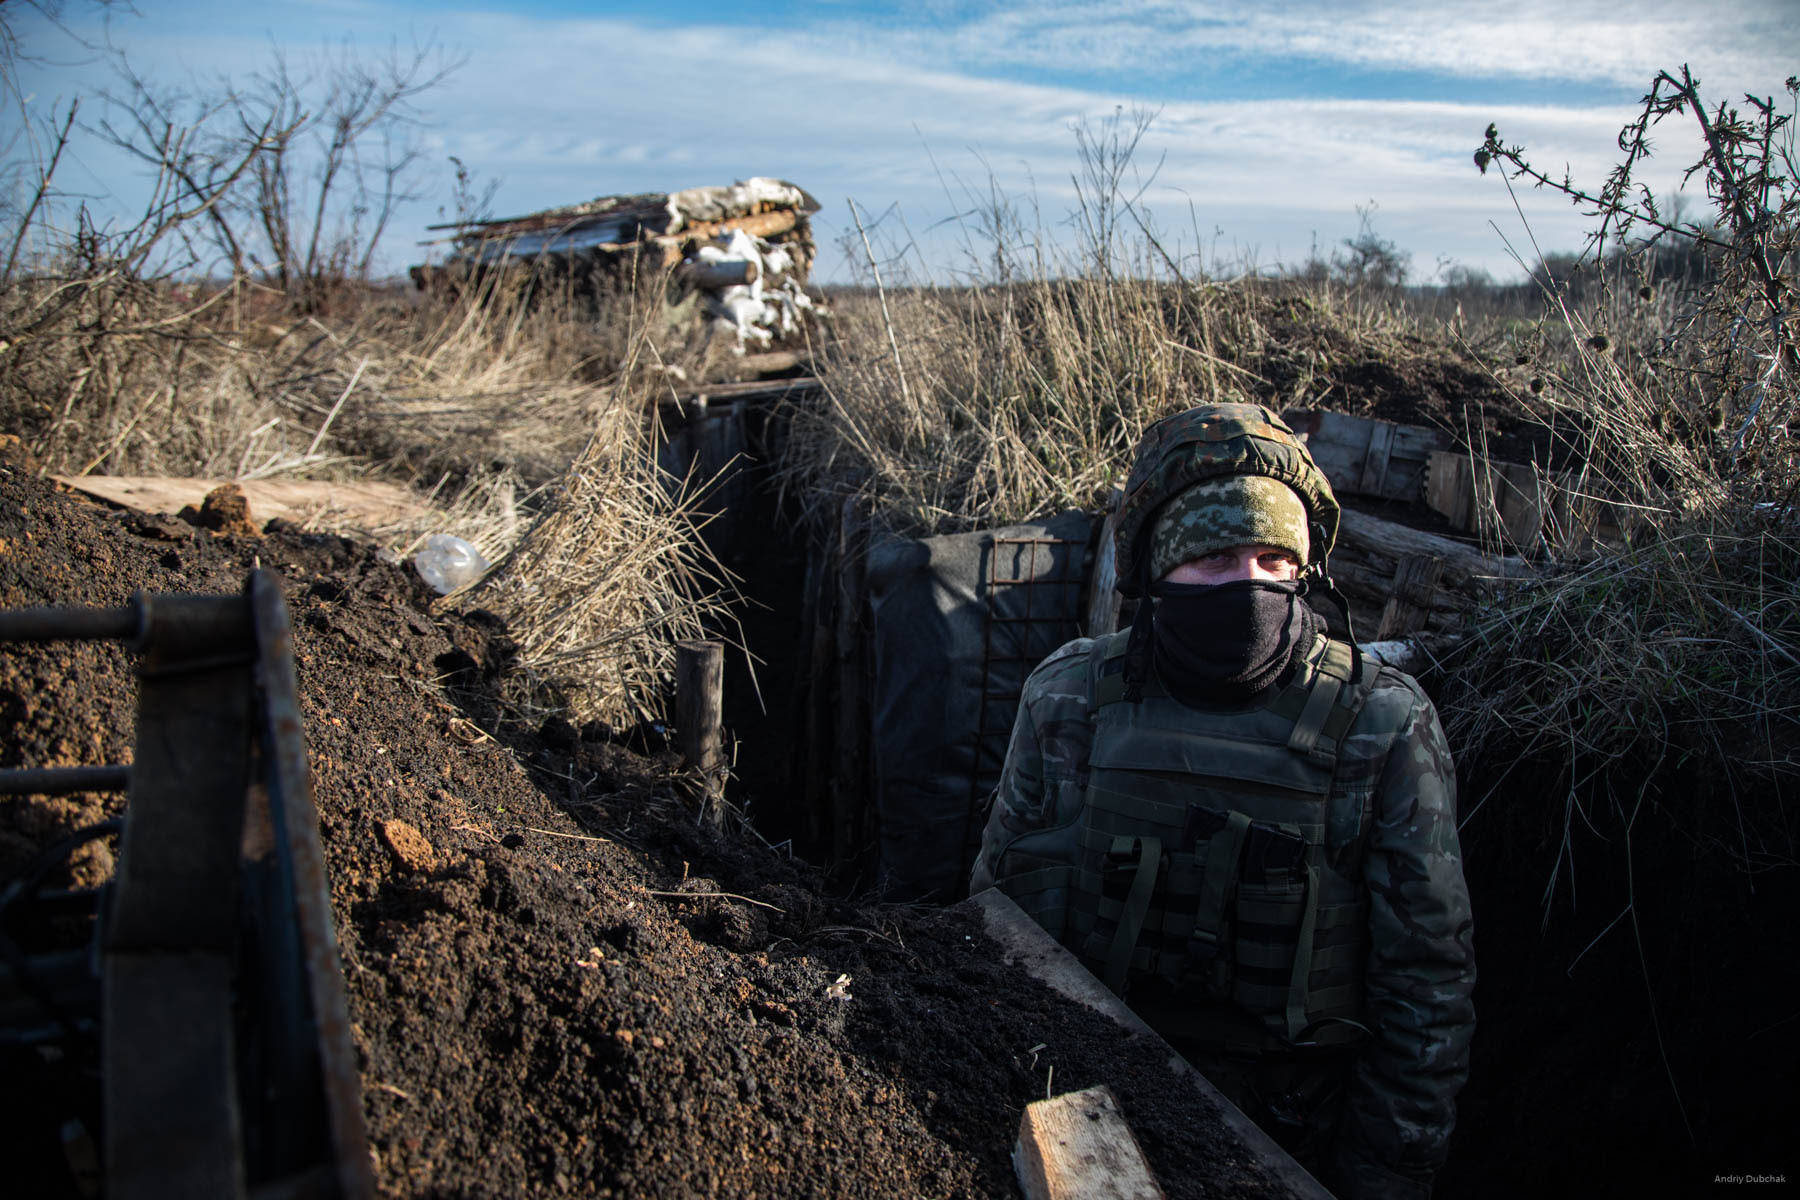 A fighter in the line of trenches at the front, near Popanskaya, December 2017.